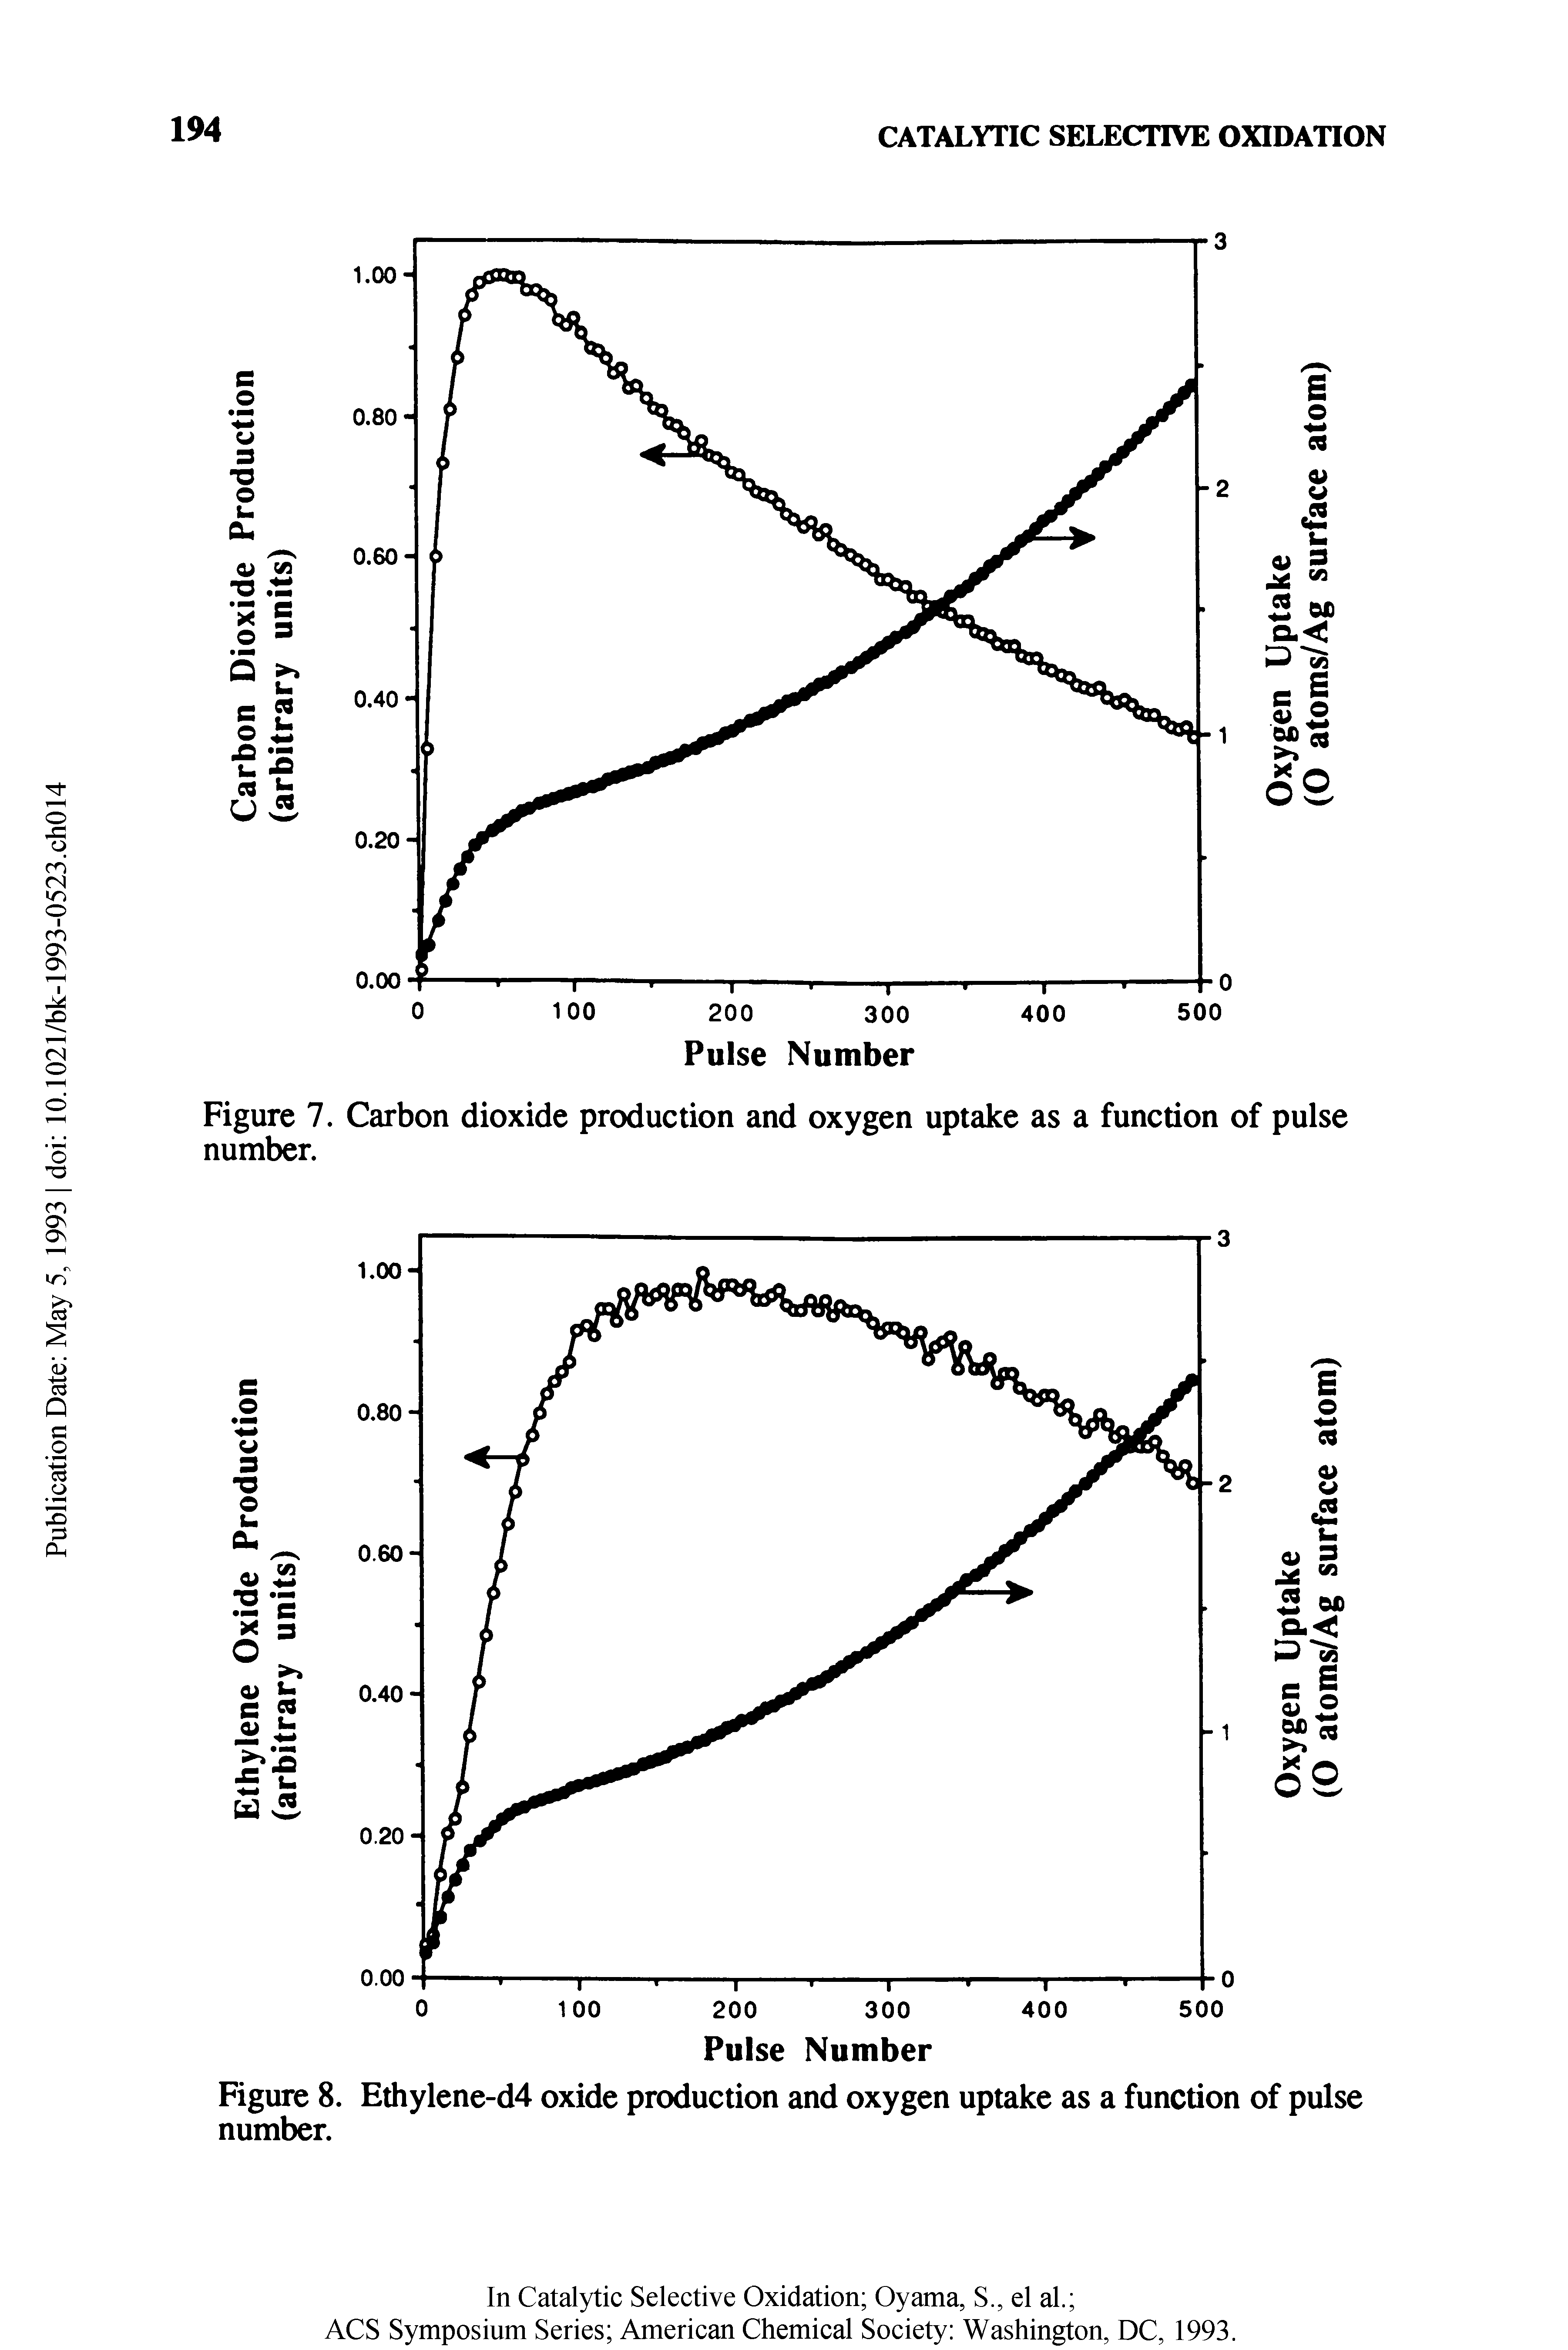 Figure 7. Carbon dioxide production and oxygen uptake as a function of pulse number.